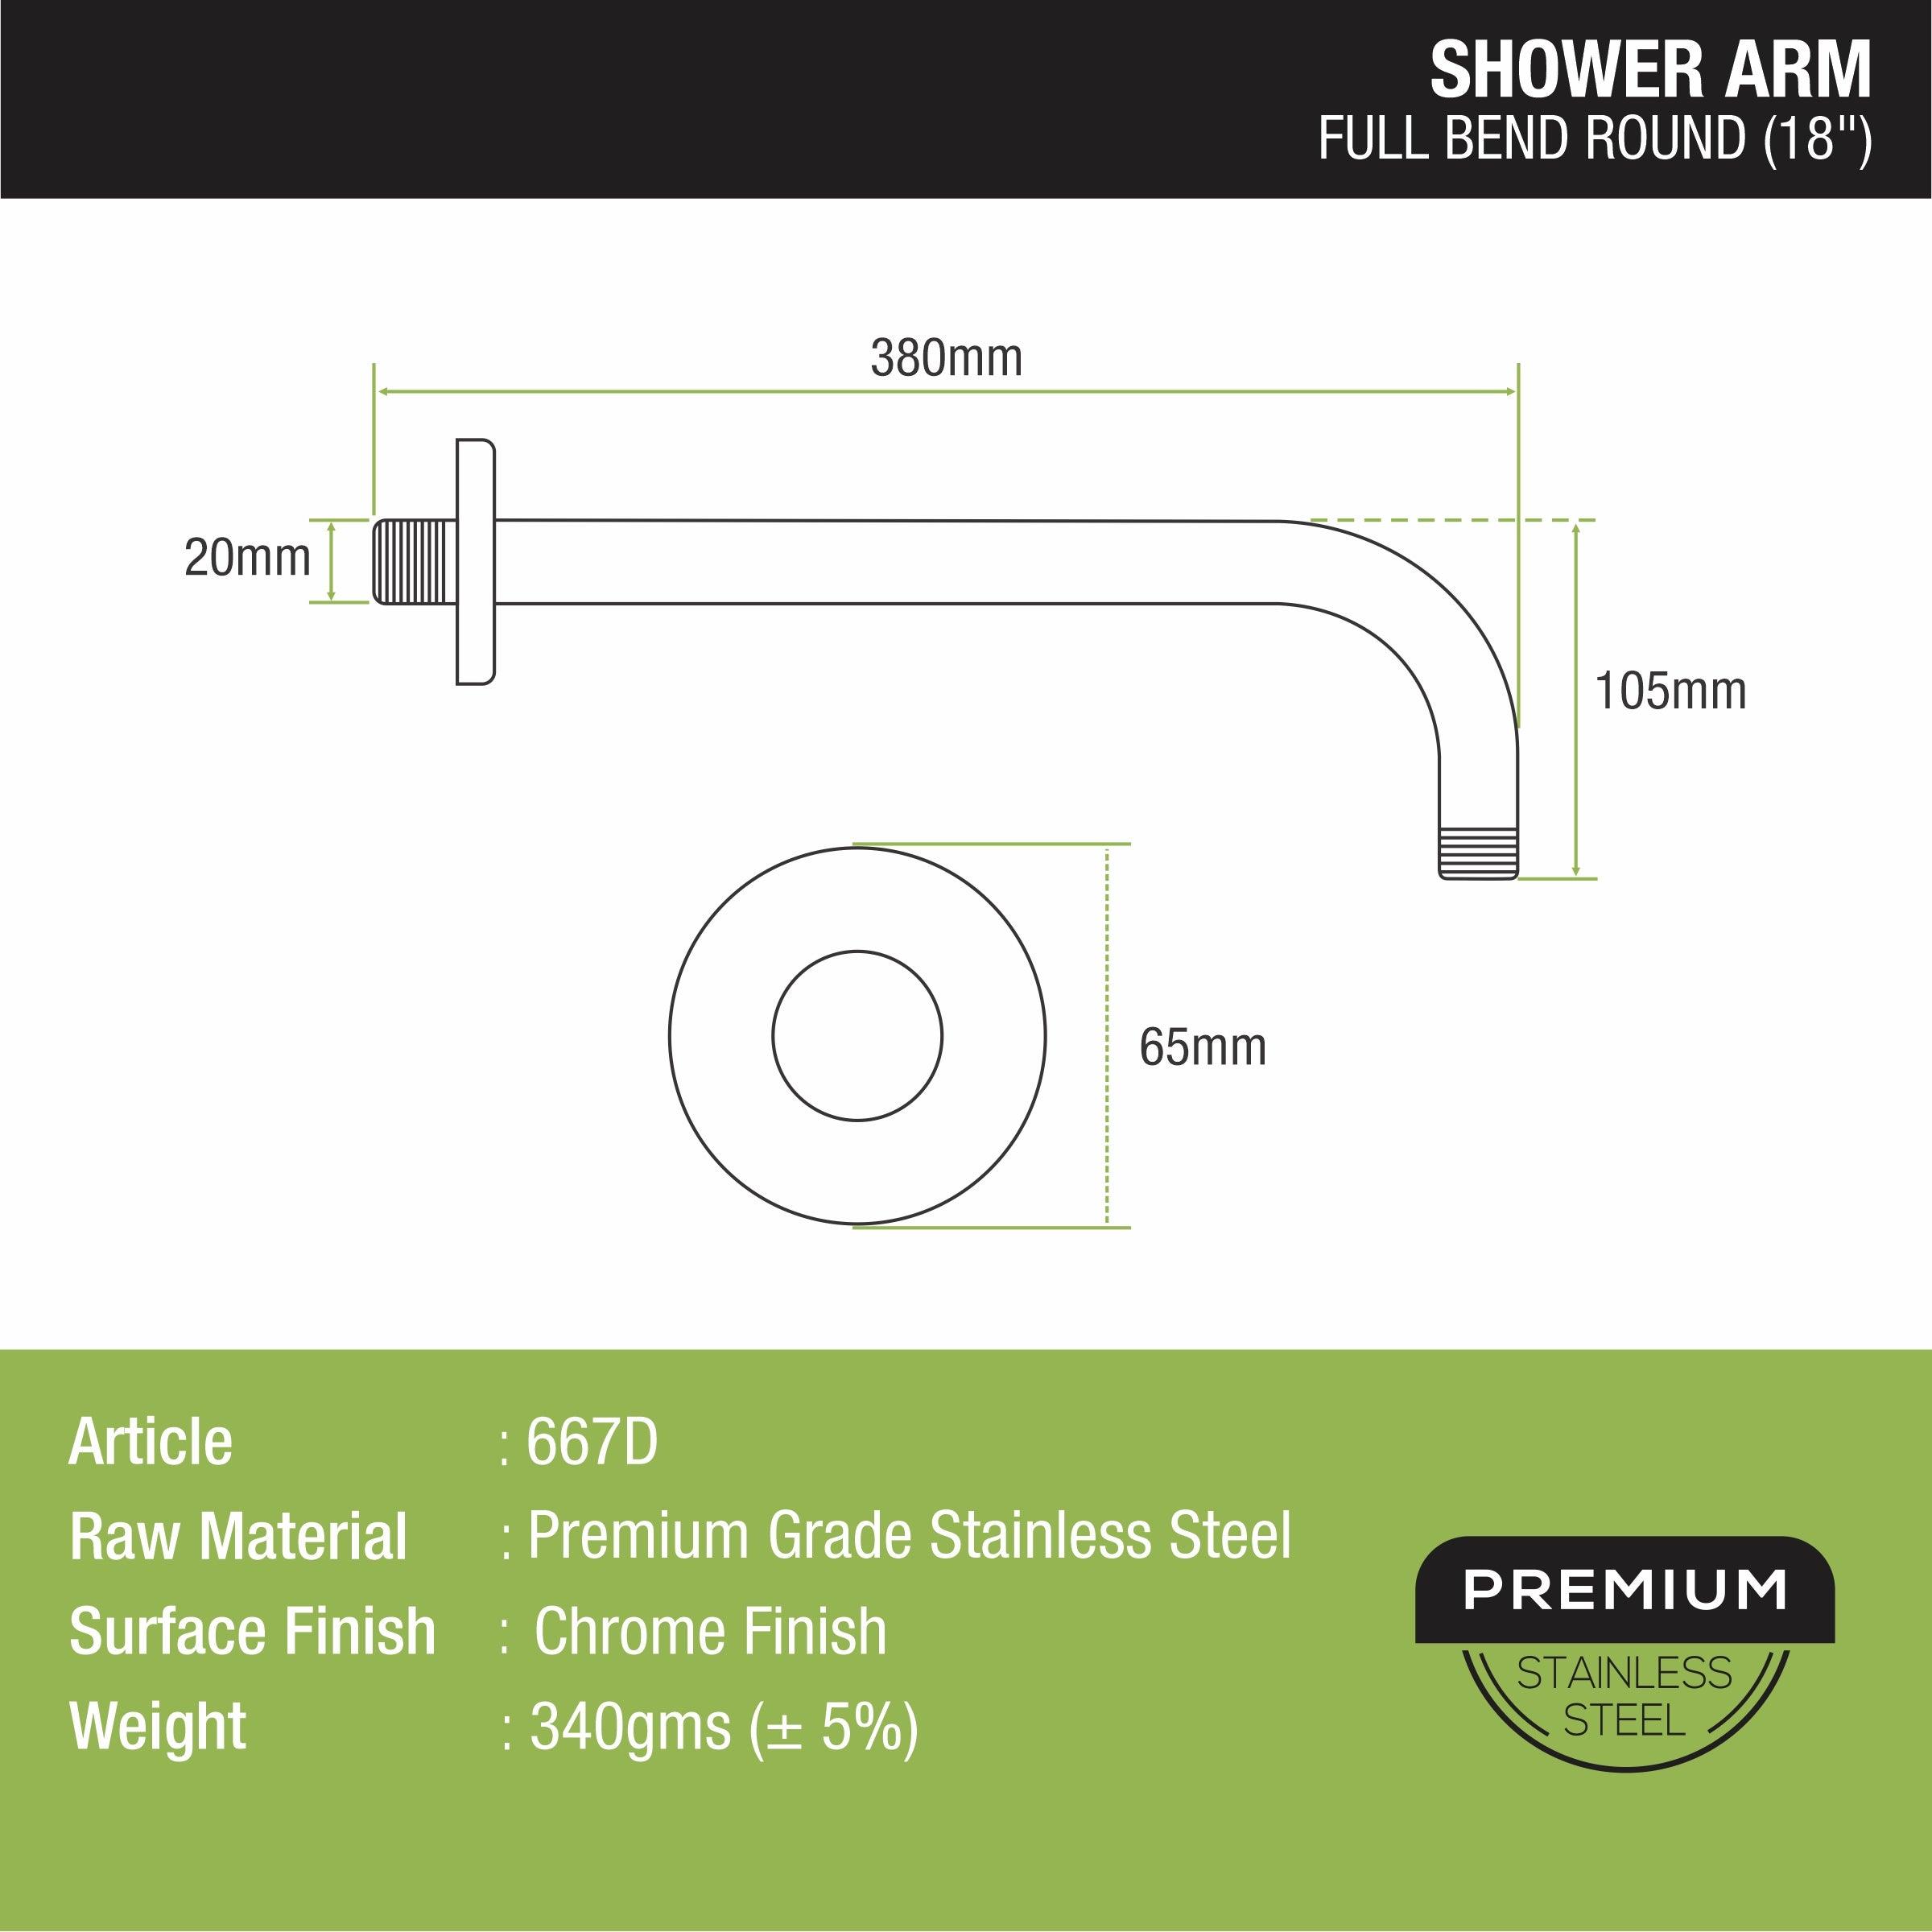 Full Bend Round Shower Arm (18 Inches) sizes and dimensions